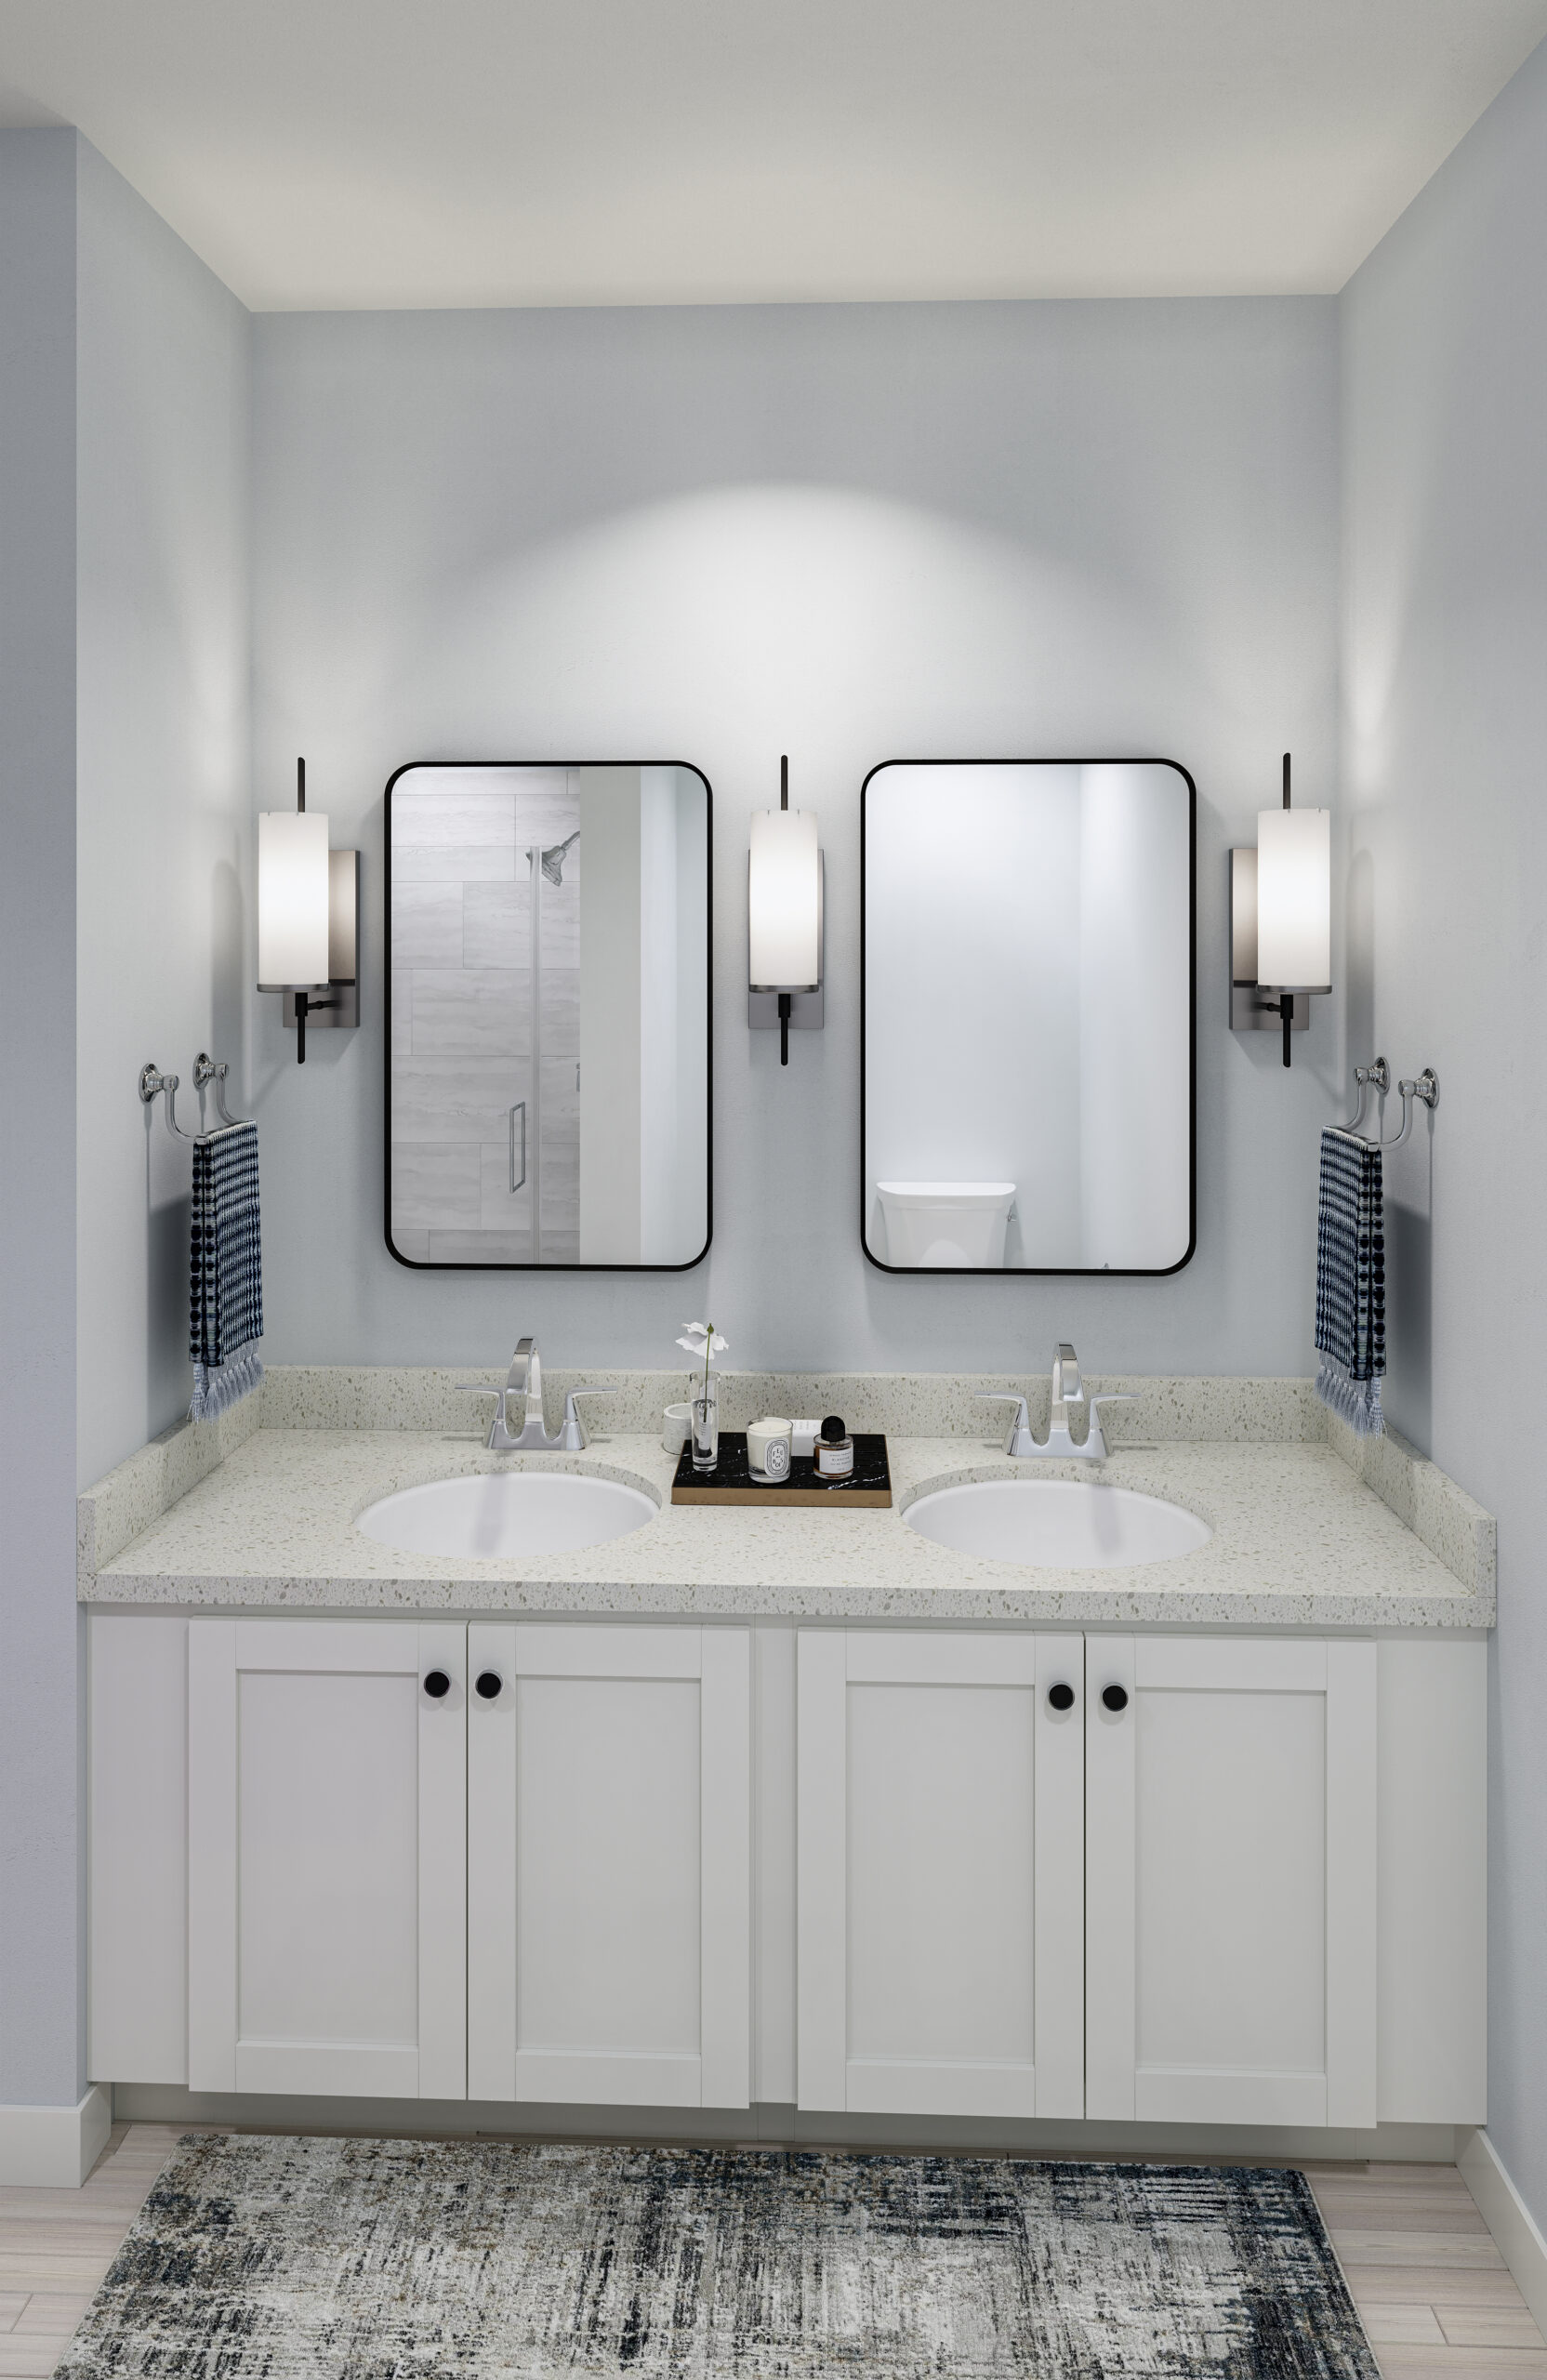 Luxury apartment bathroom with double sink vanity, storage cabinets below that countertop, and large rectangular mirrors above each sink.